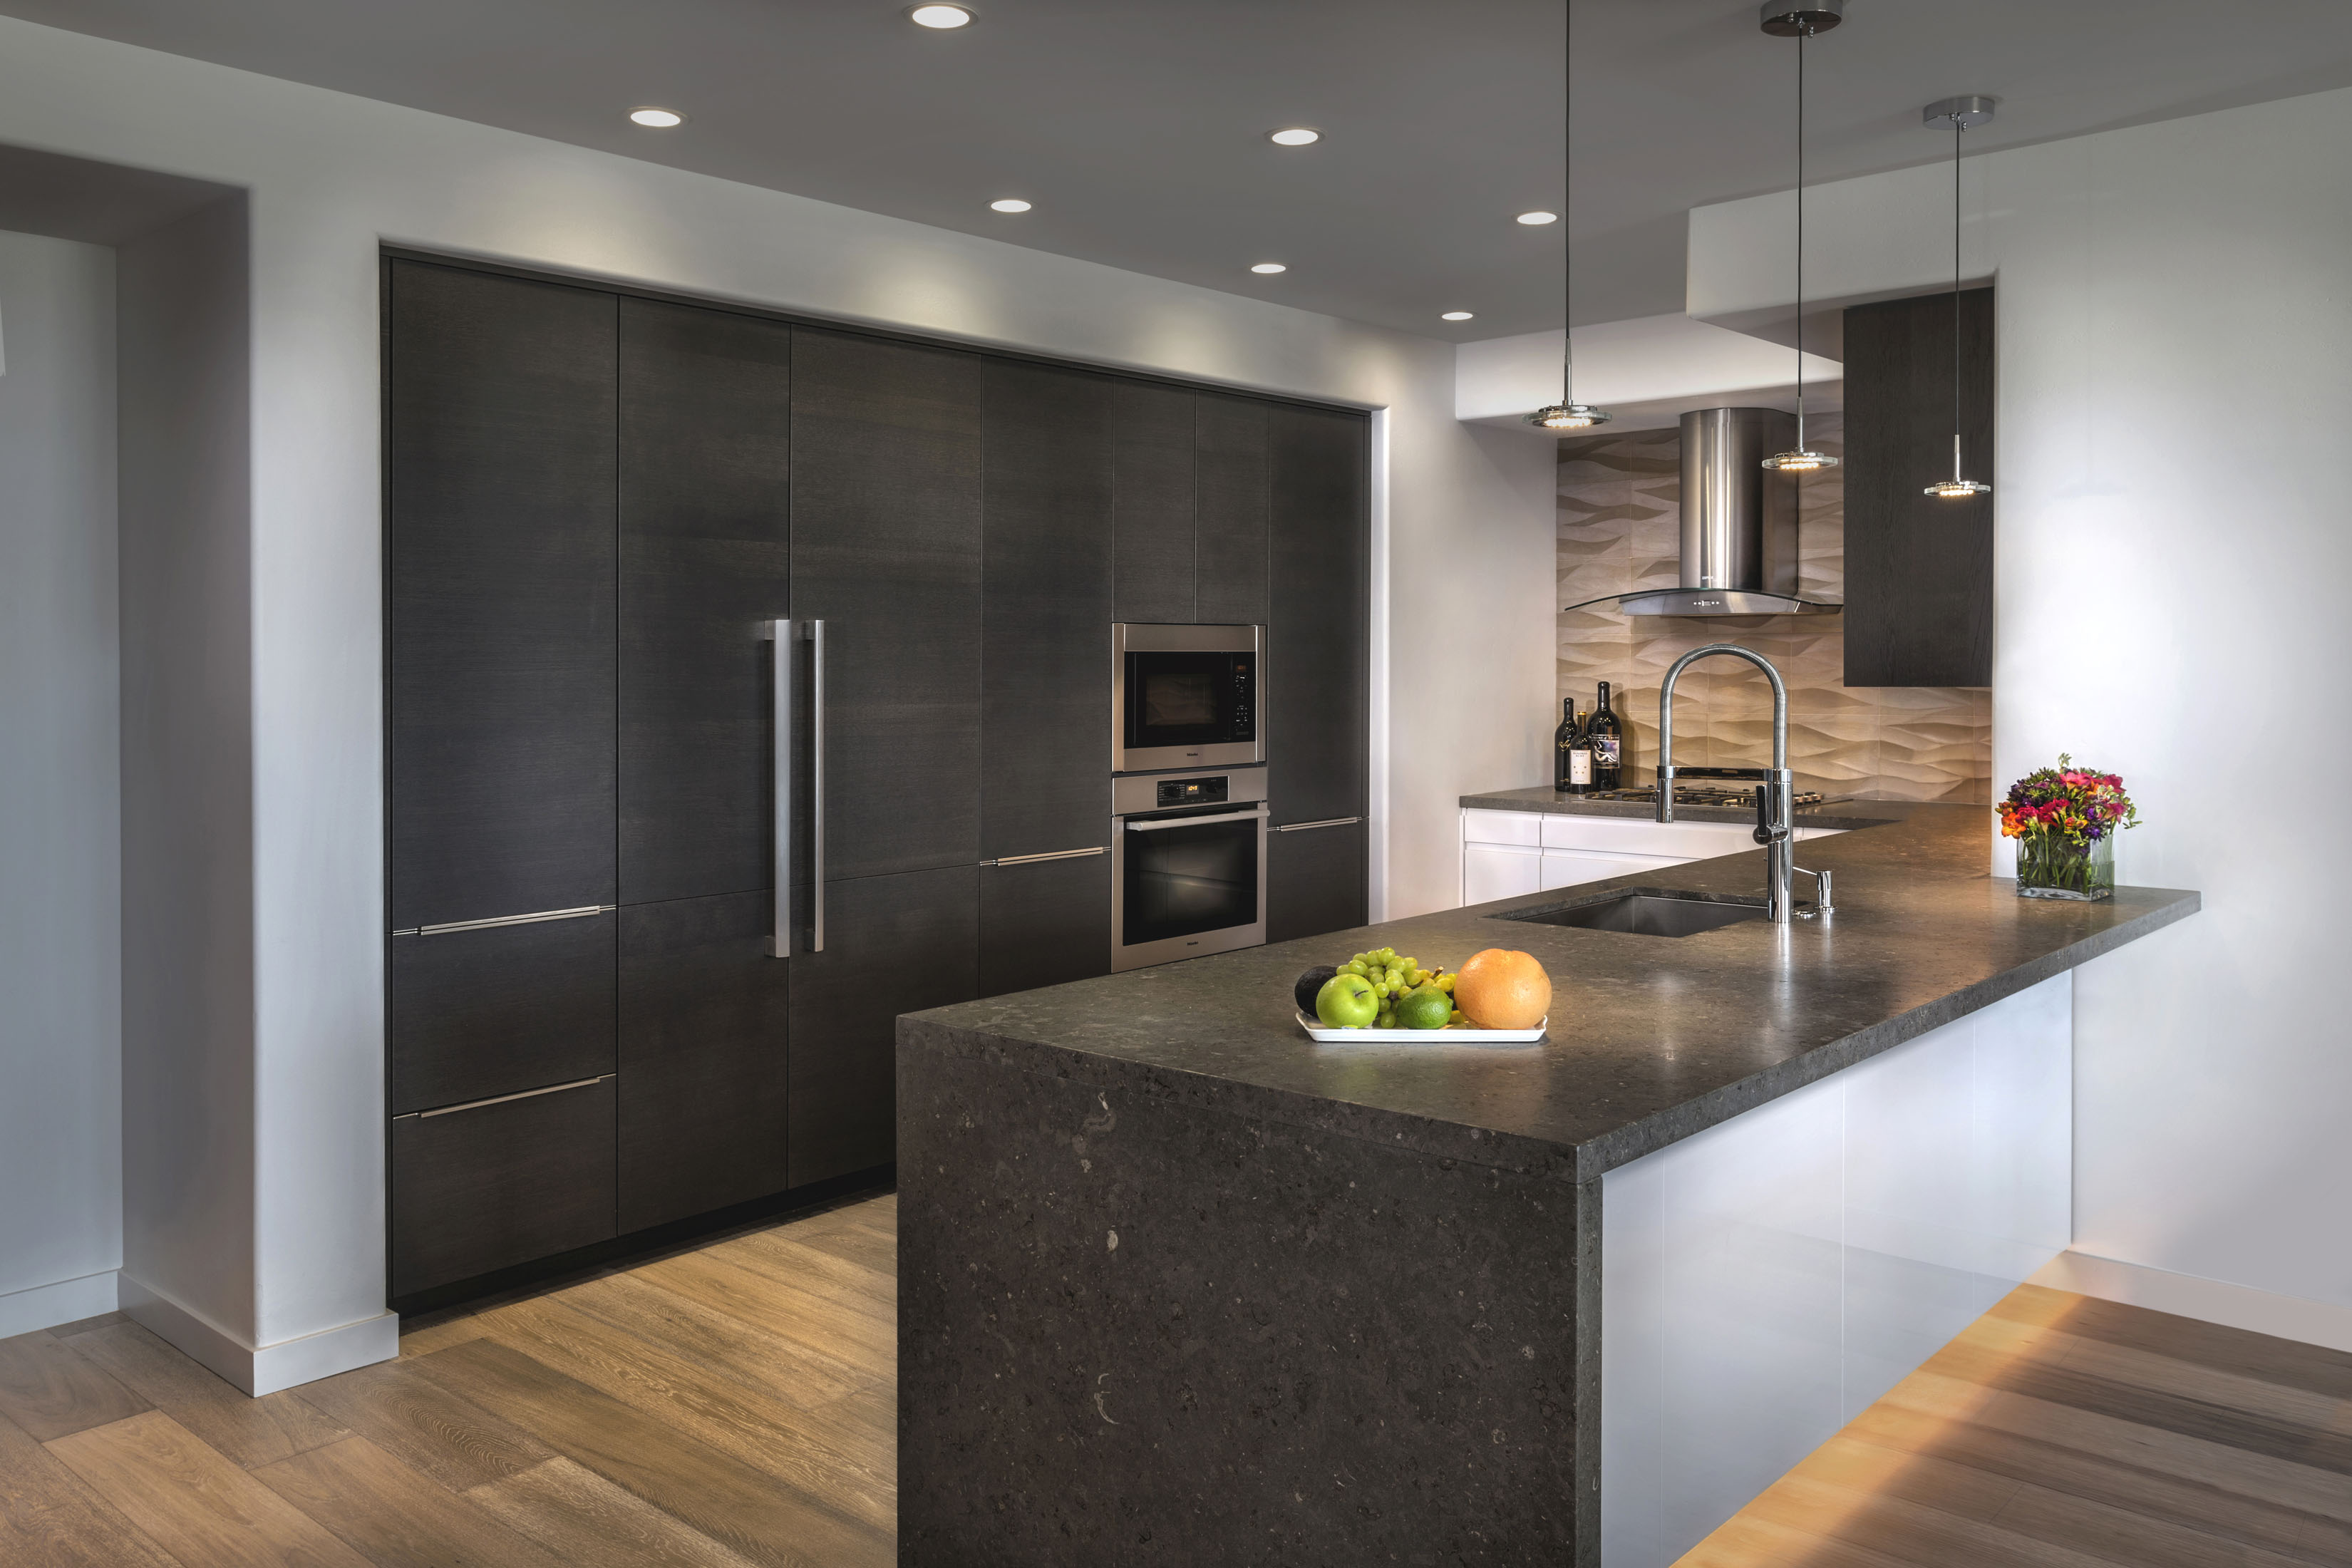 rational high gloss lacquer and dark oak cabinetry